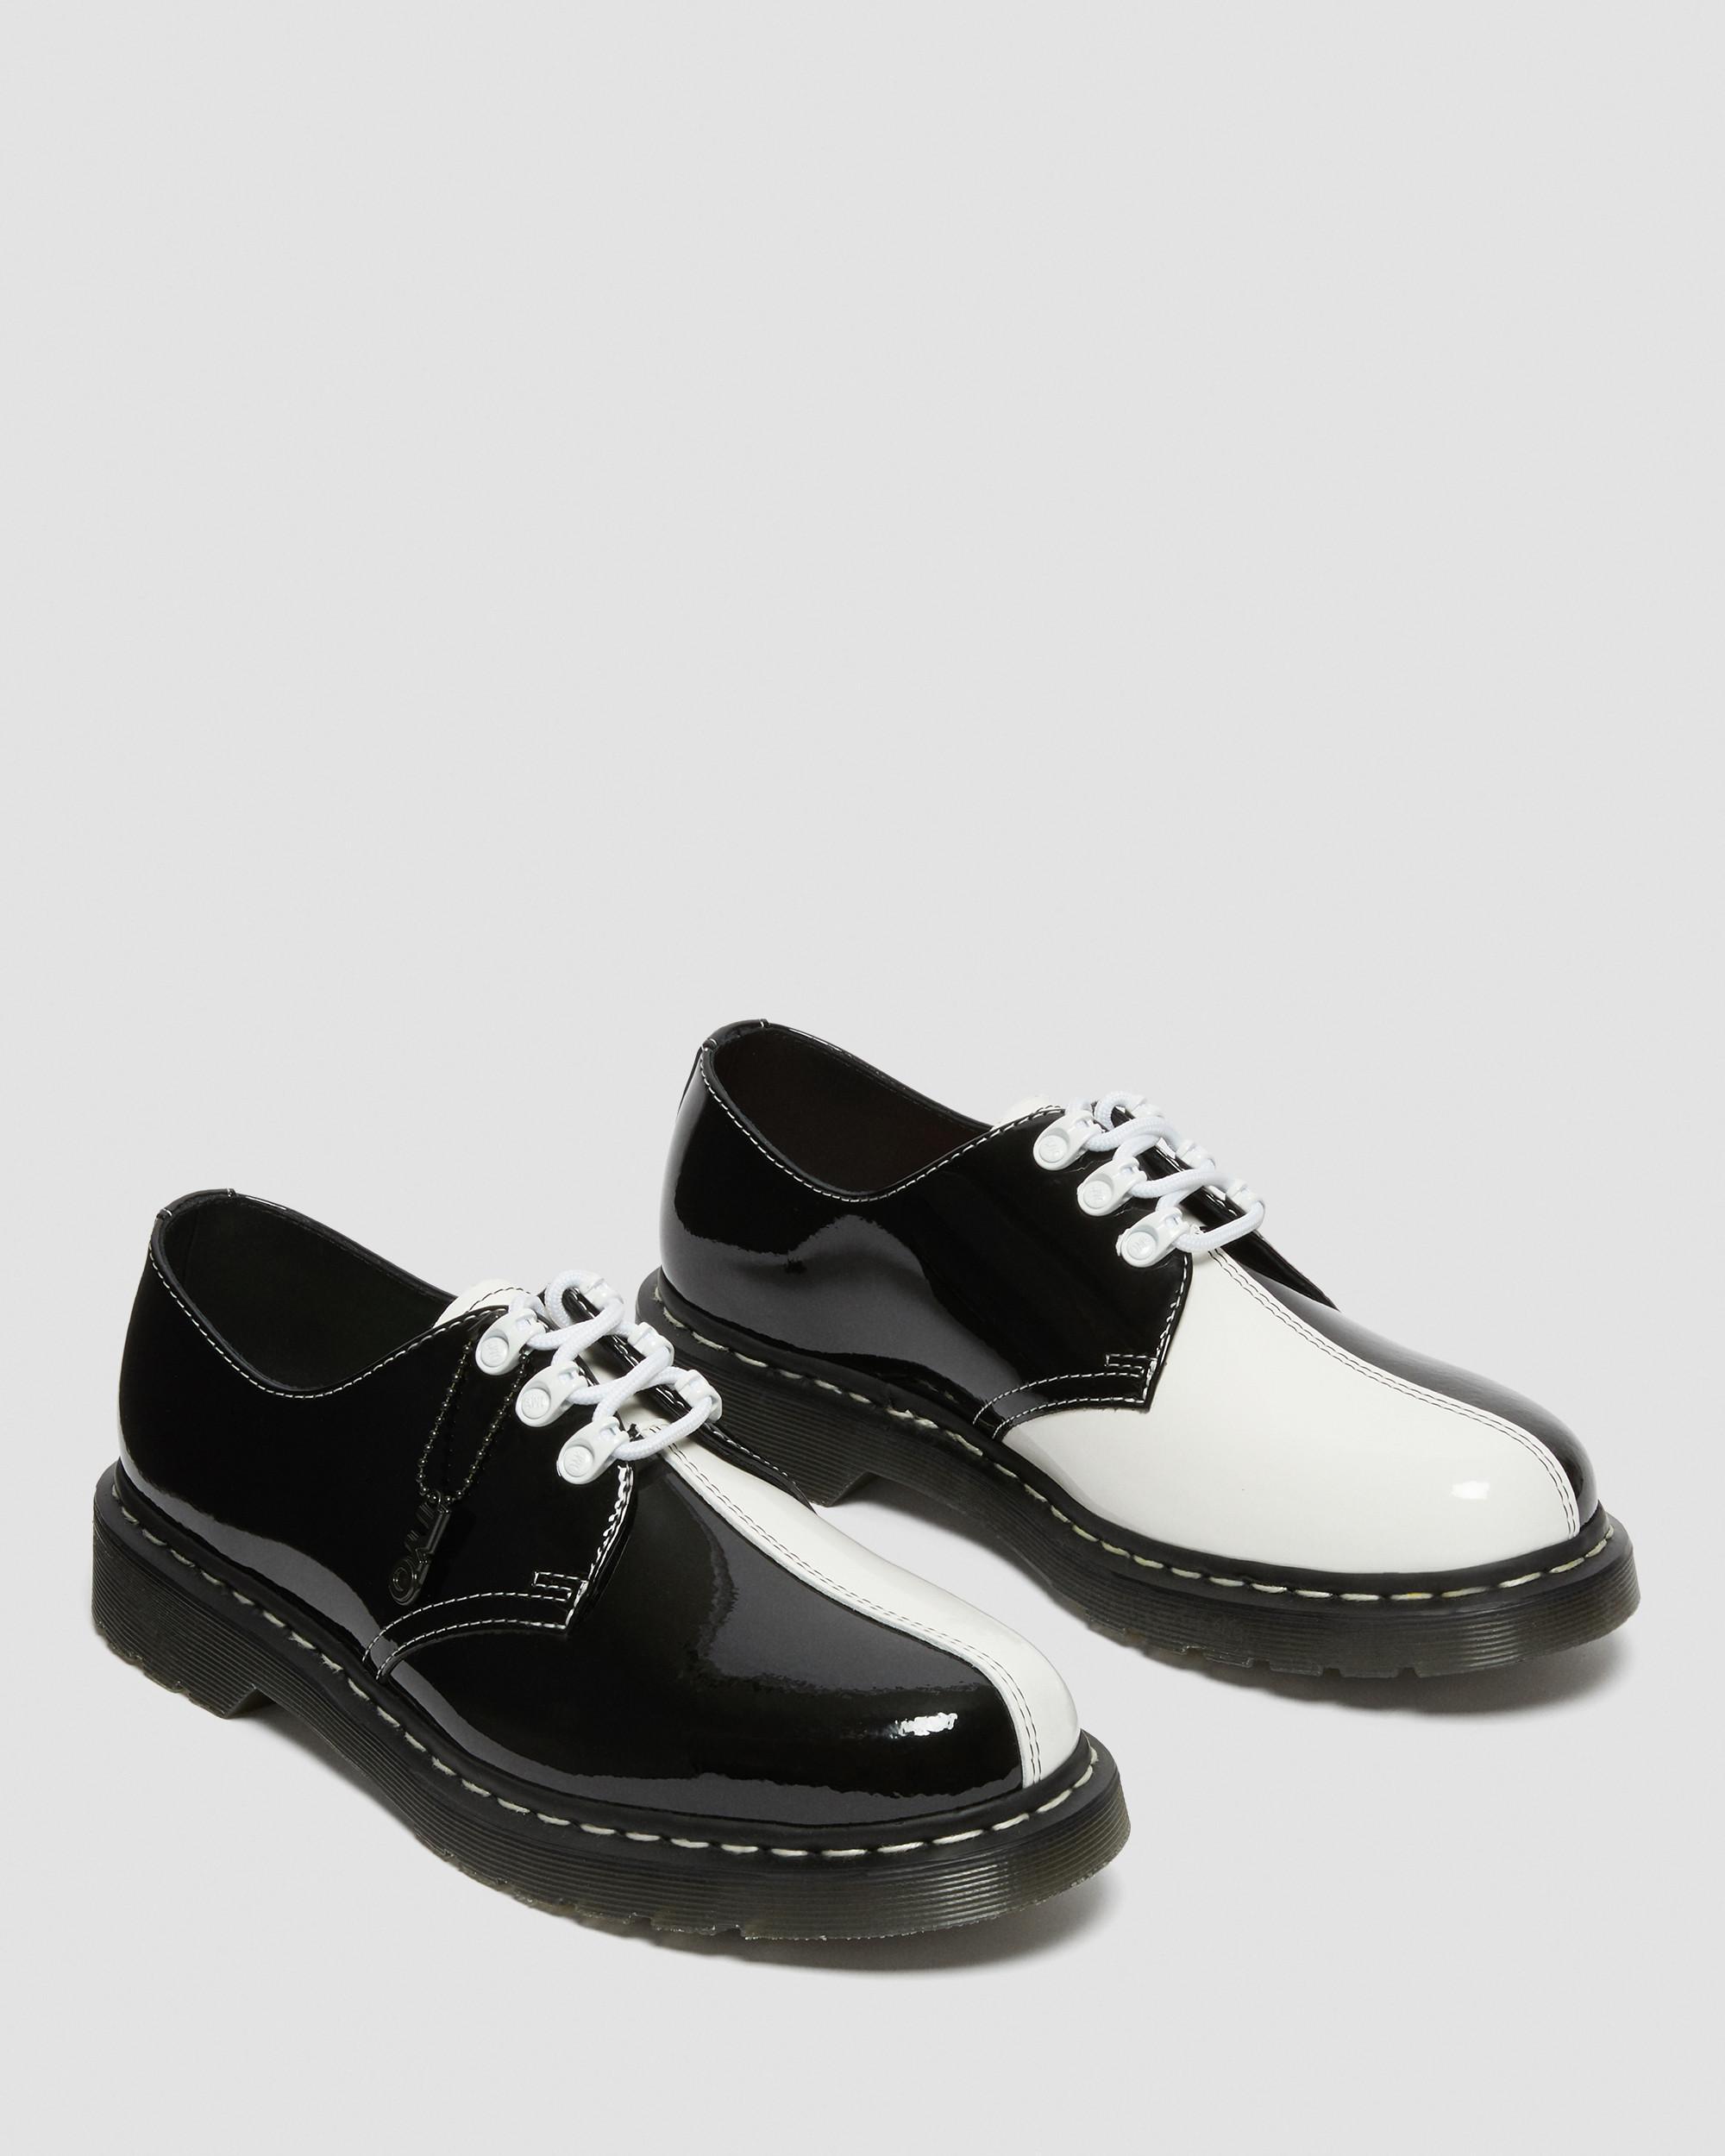 Bungalow Foreman Asser Dr. Martens 1461 Tokyo Patent Leather Oxford Shoes in Black for Men | Lyst